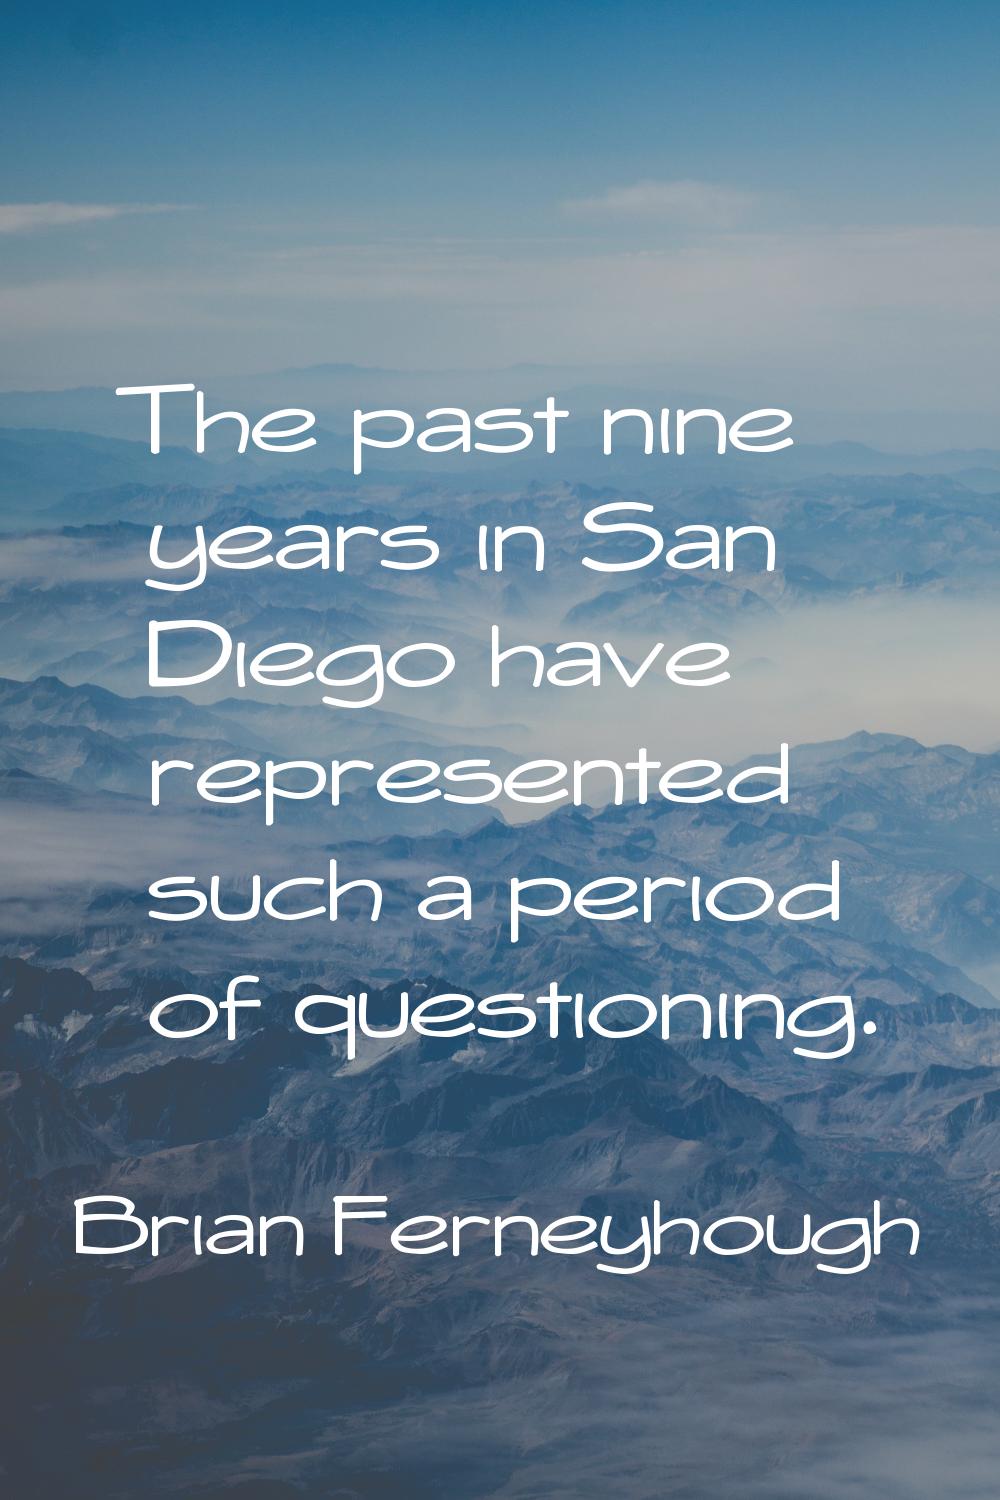 The past nine years in San Diego have represented such a period of questioning.